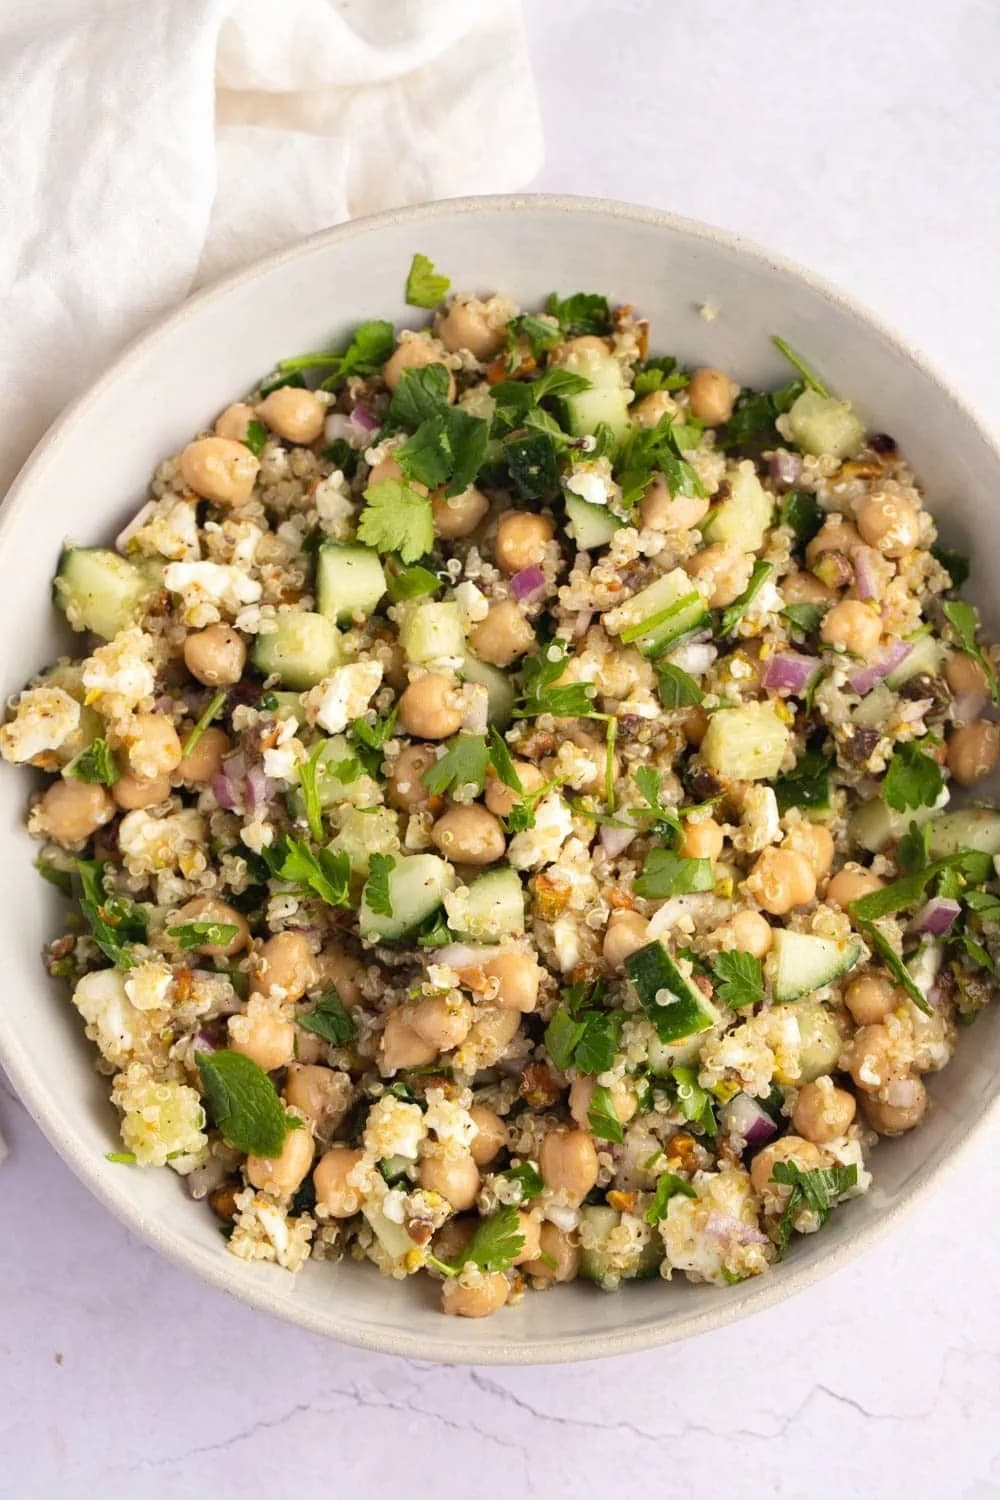 Jennifer Aniston Salad with chickpeas, onion, cucumber, quinoa, parsley, mint and feta cheese